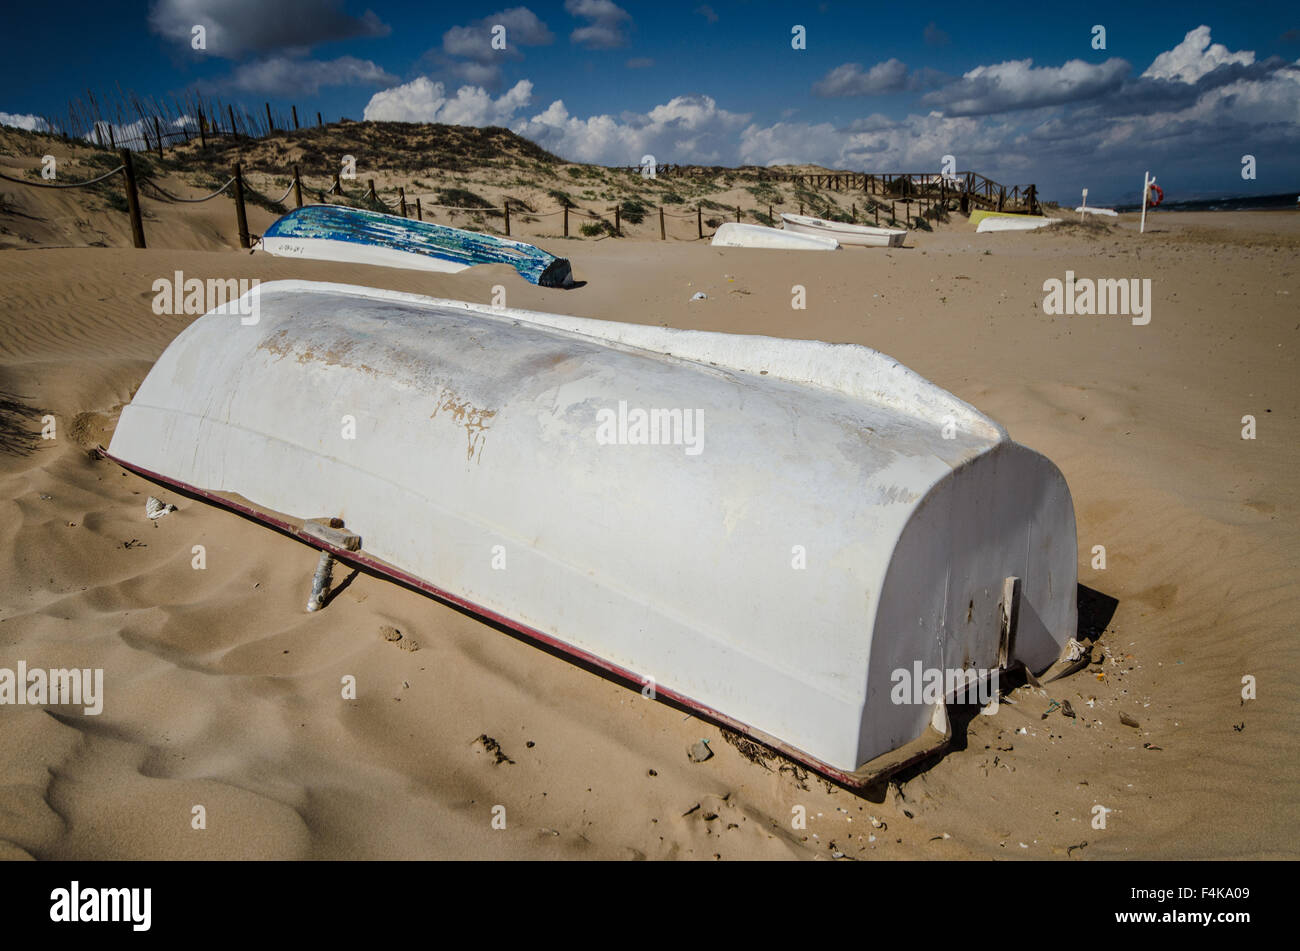 Boat on beach in Guardamar, a municipality of the province of Alicante located at the mouth of the river Segura on the Mediterranean Sea Stock Photo